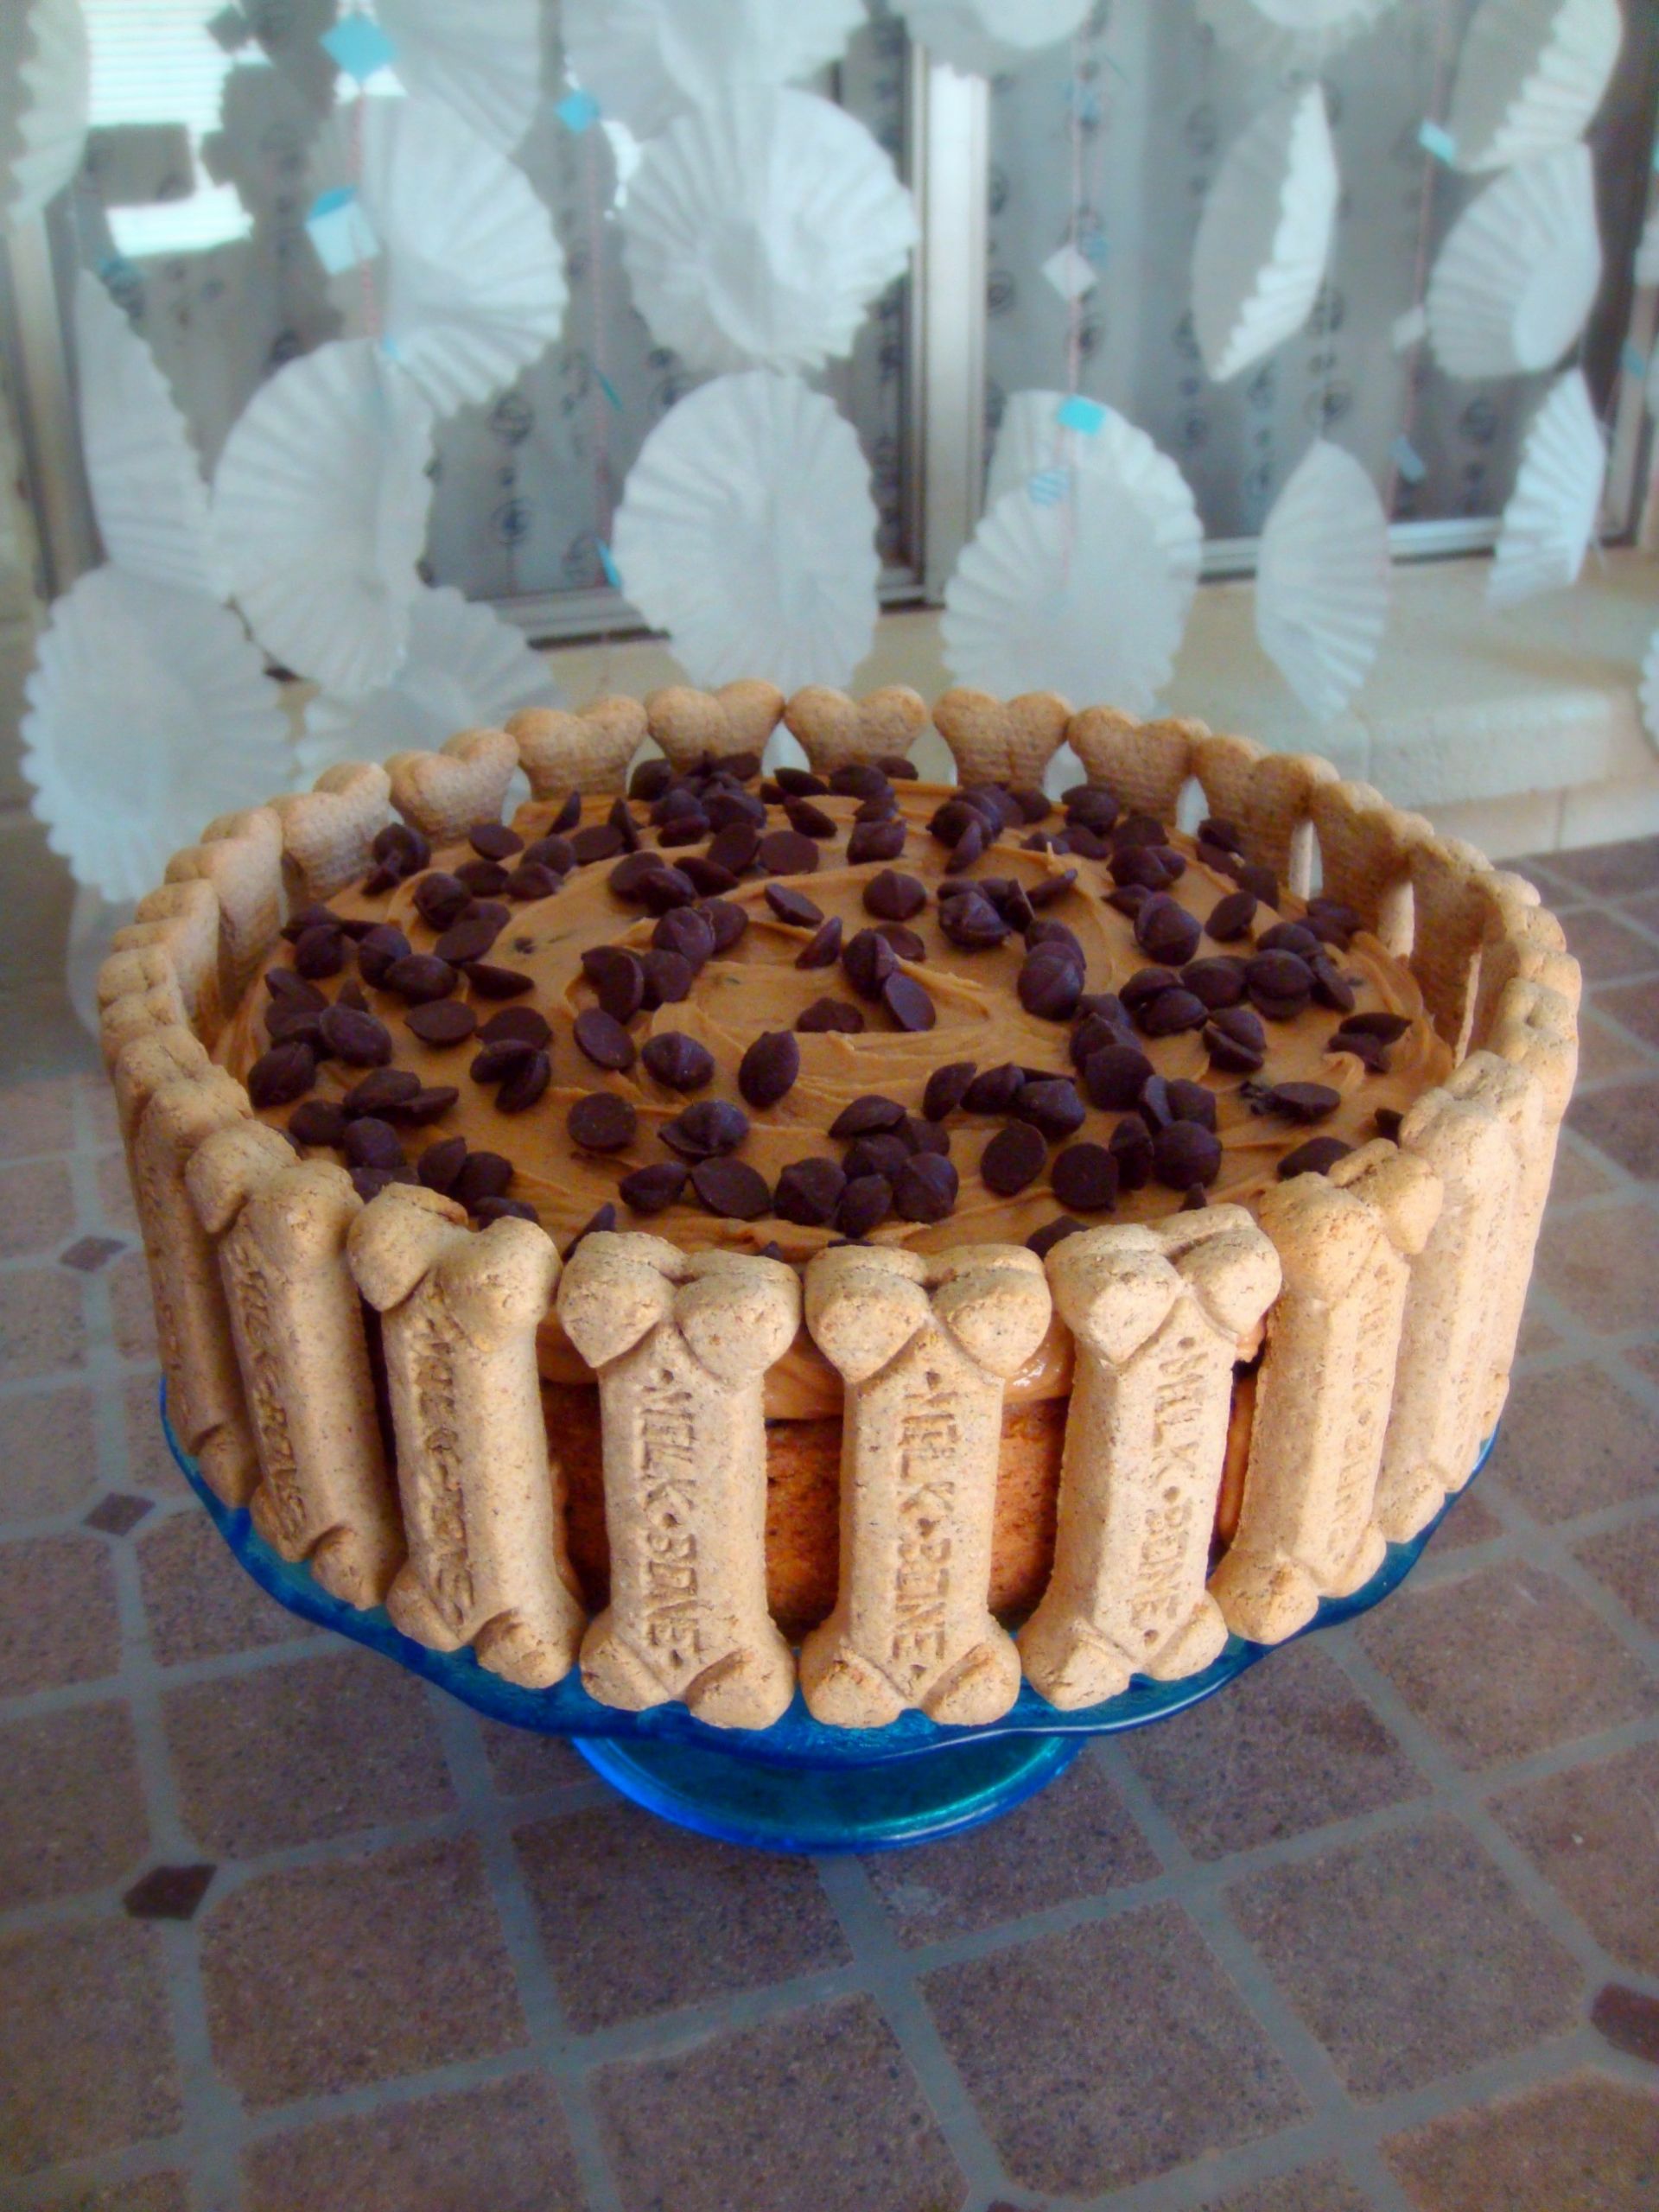 Peanut Butter Birthday Cake
 Banana Carob Oat Cake with Peanut Butter Frosting Baked